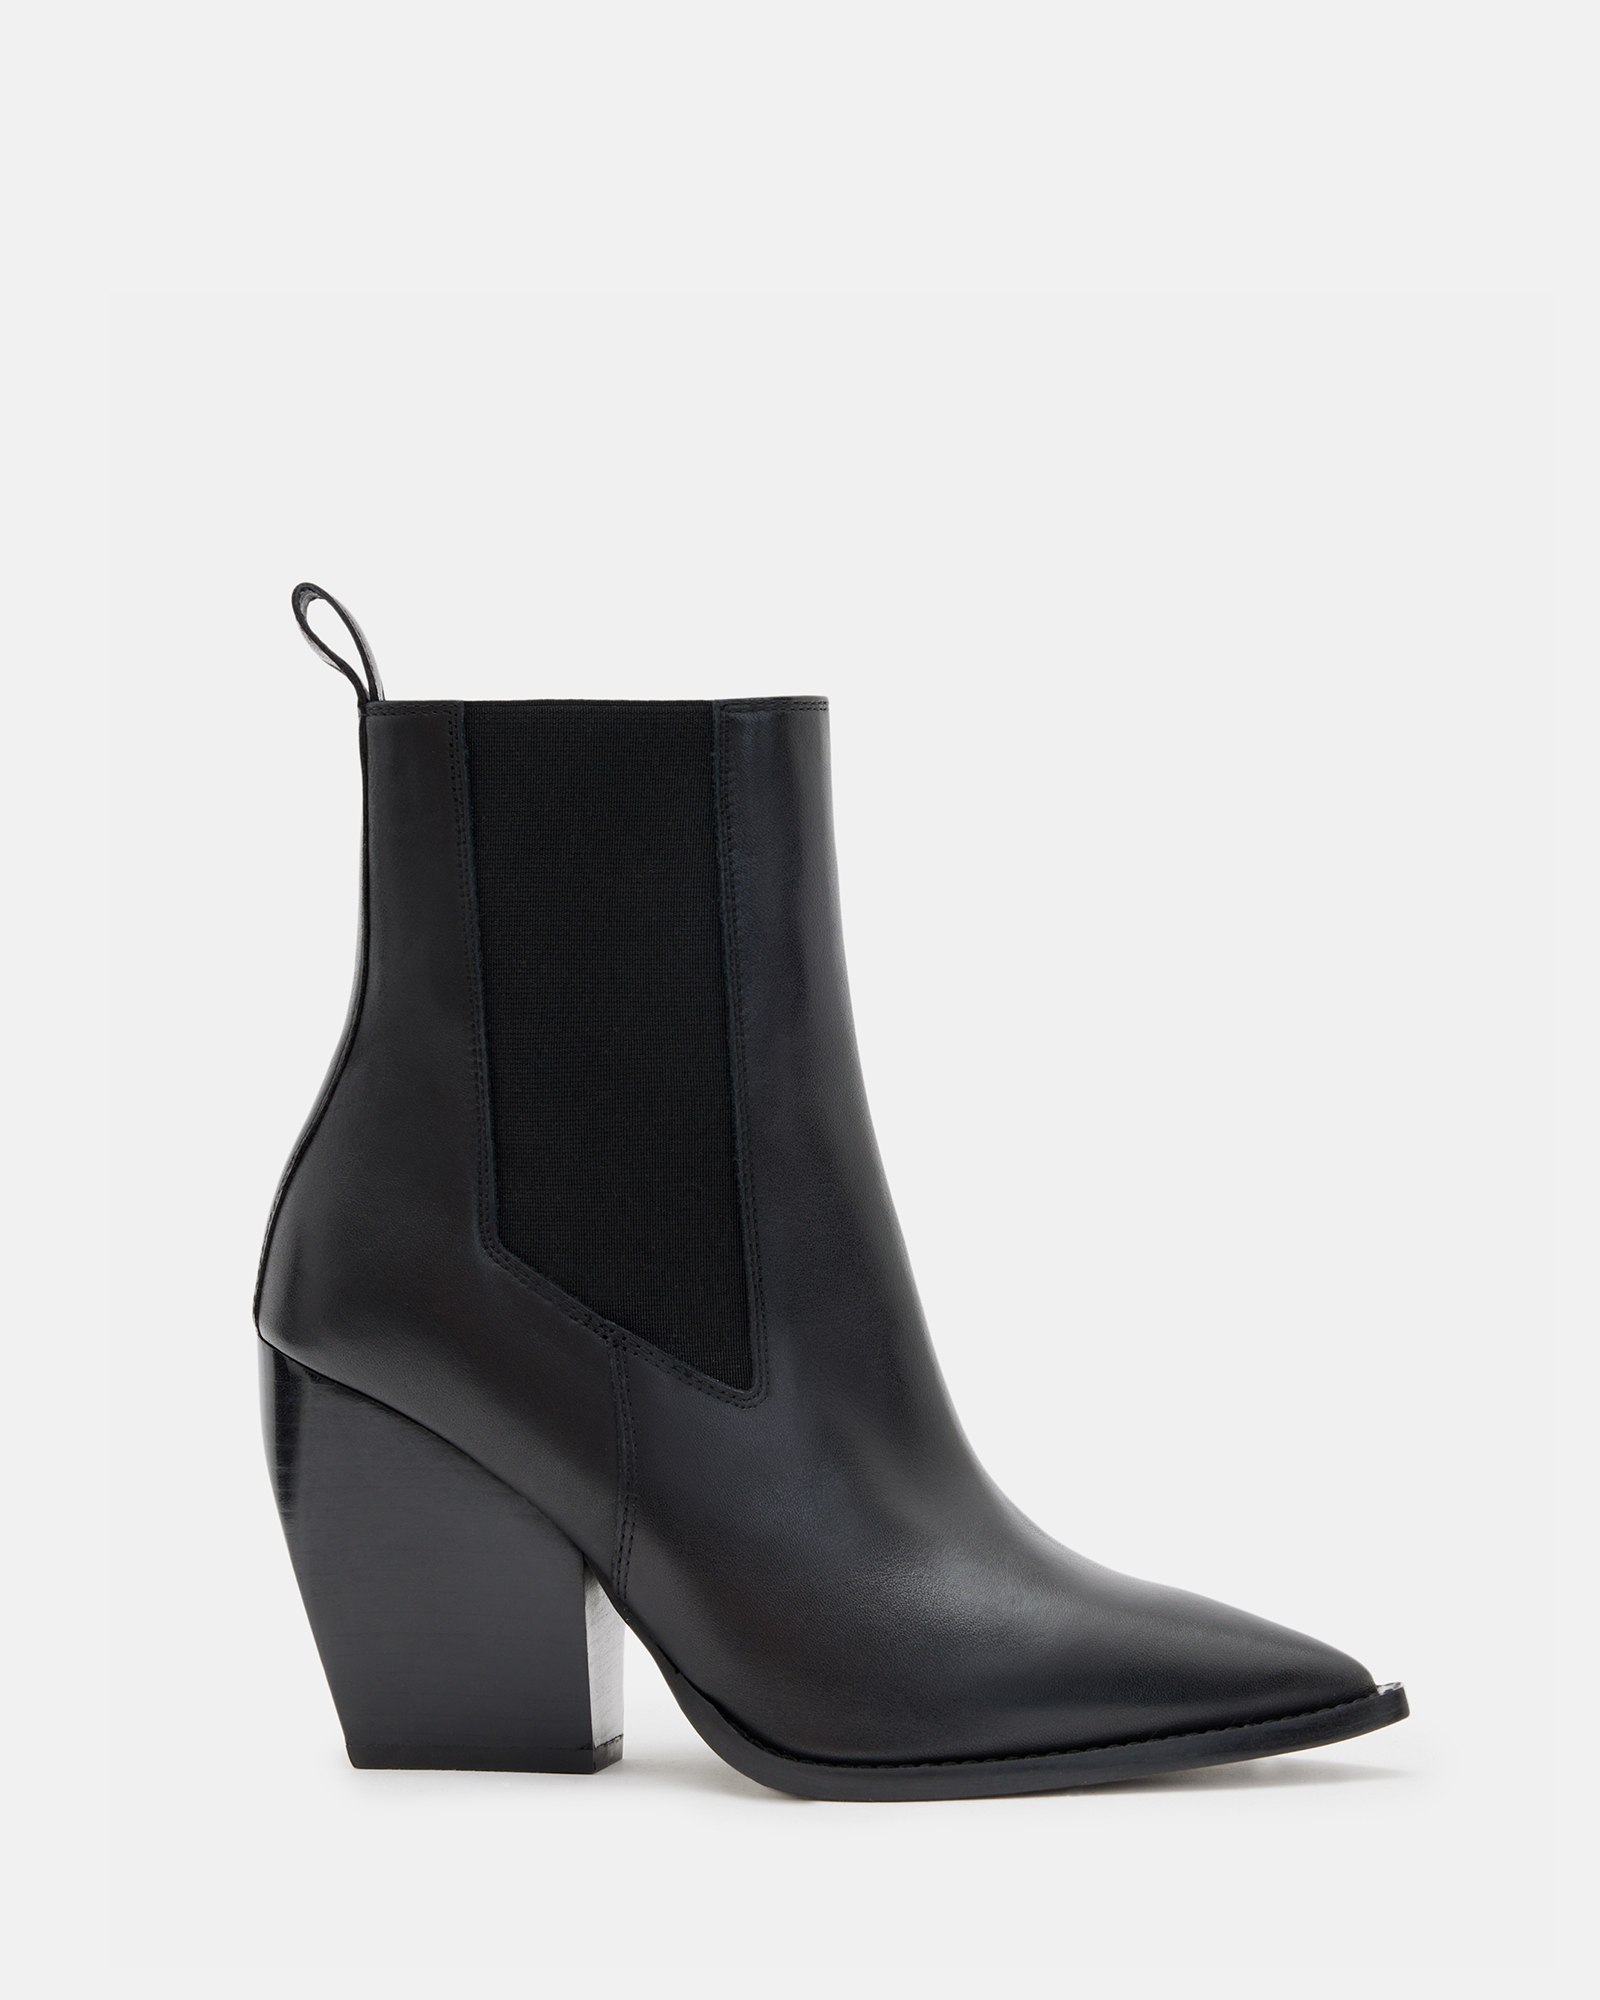 AllSaints Ria Pointed Leather Boots,, Black